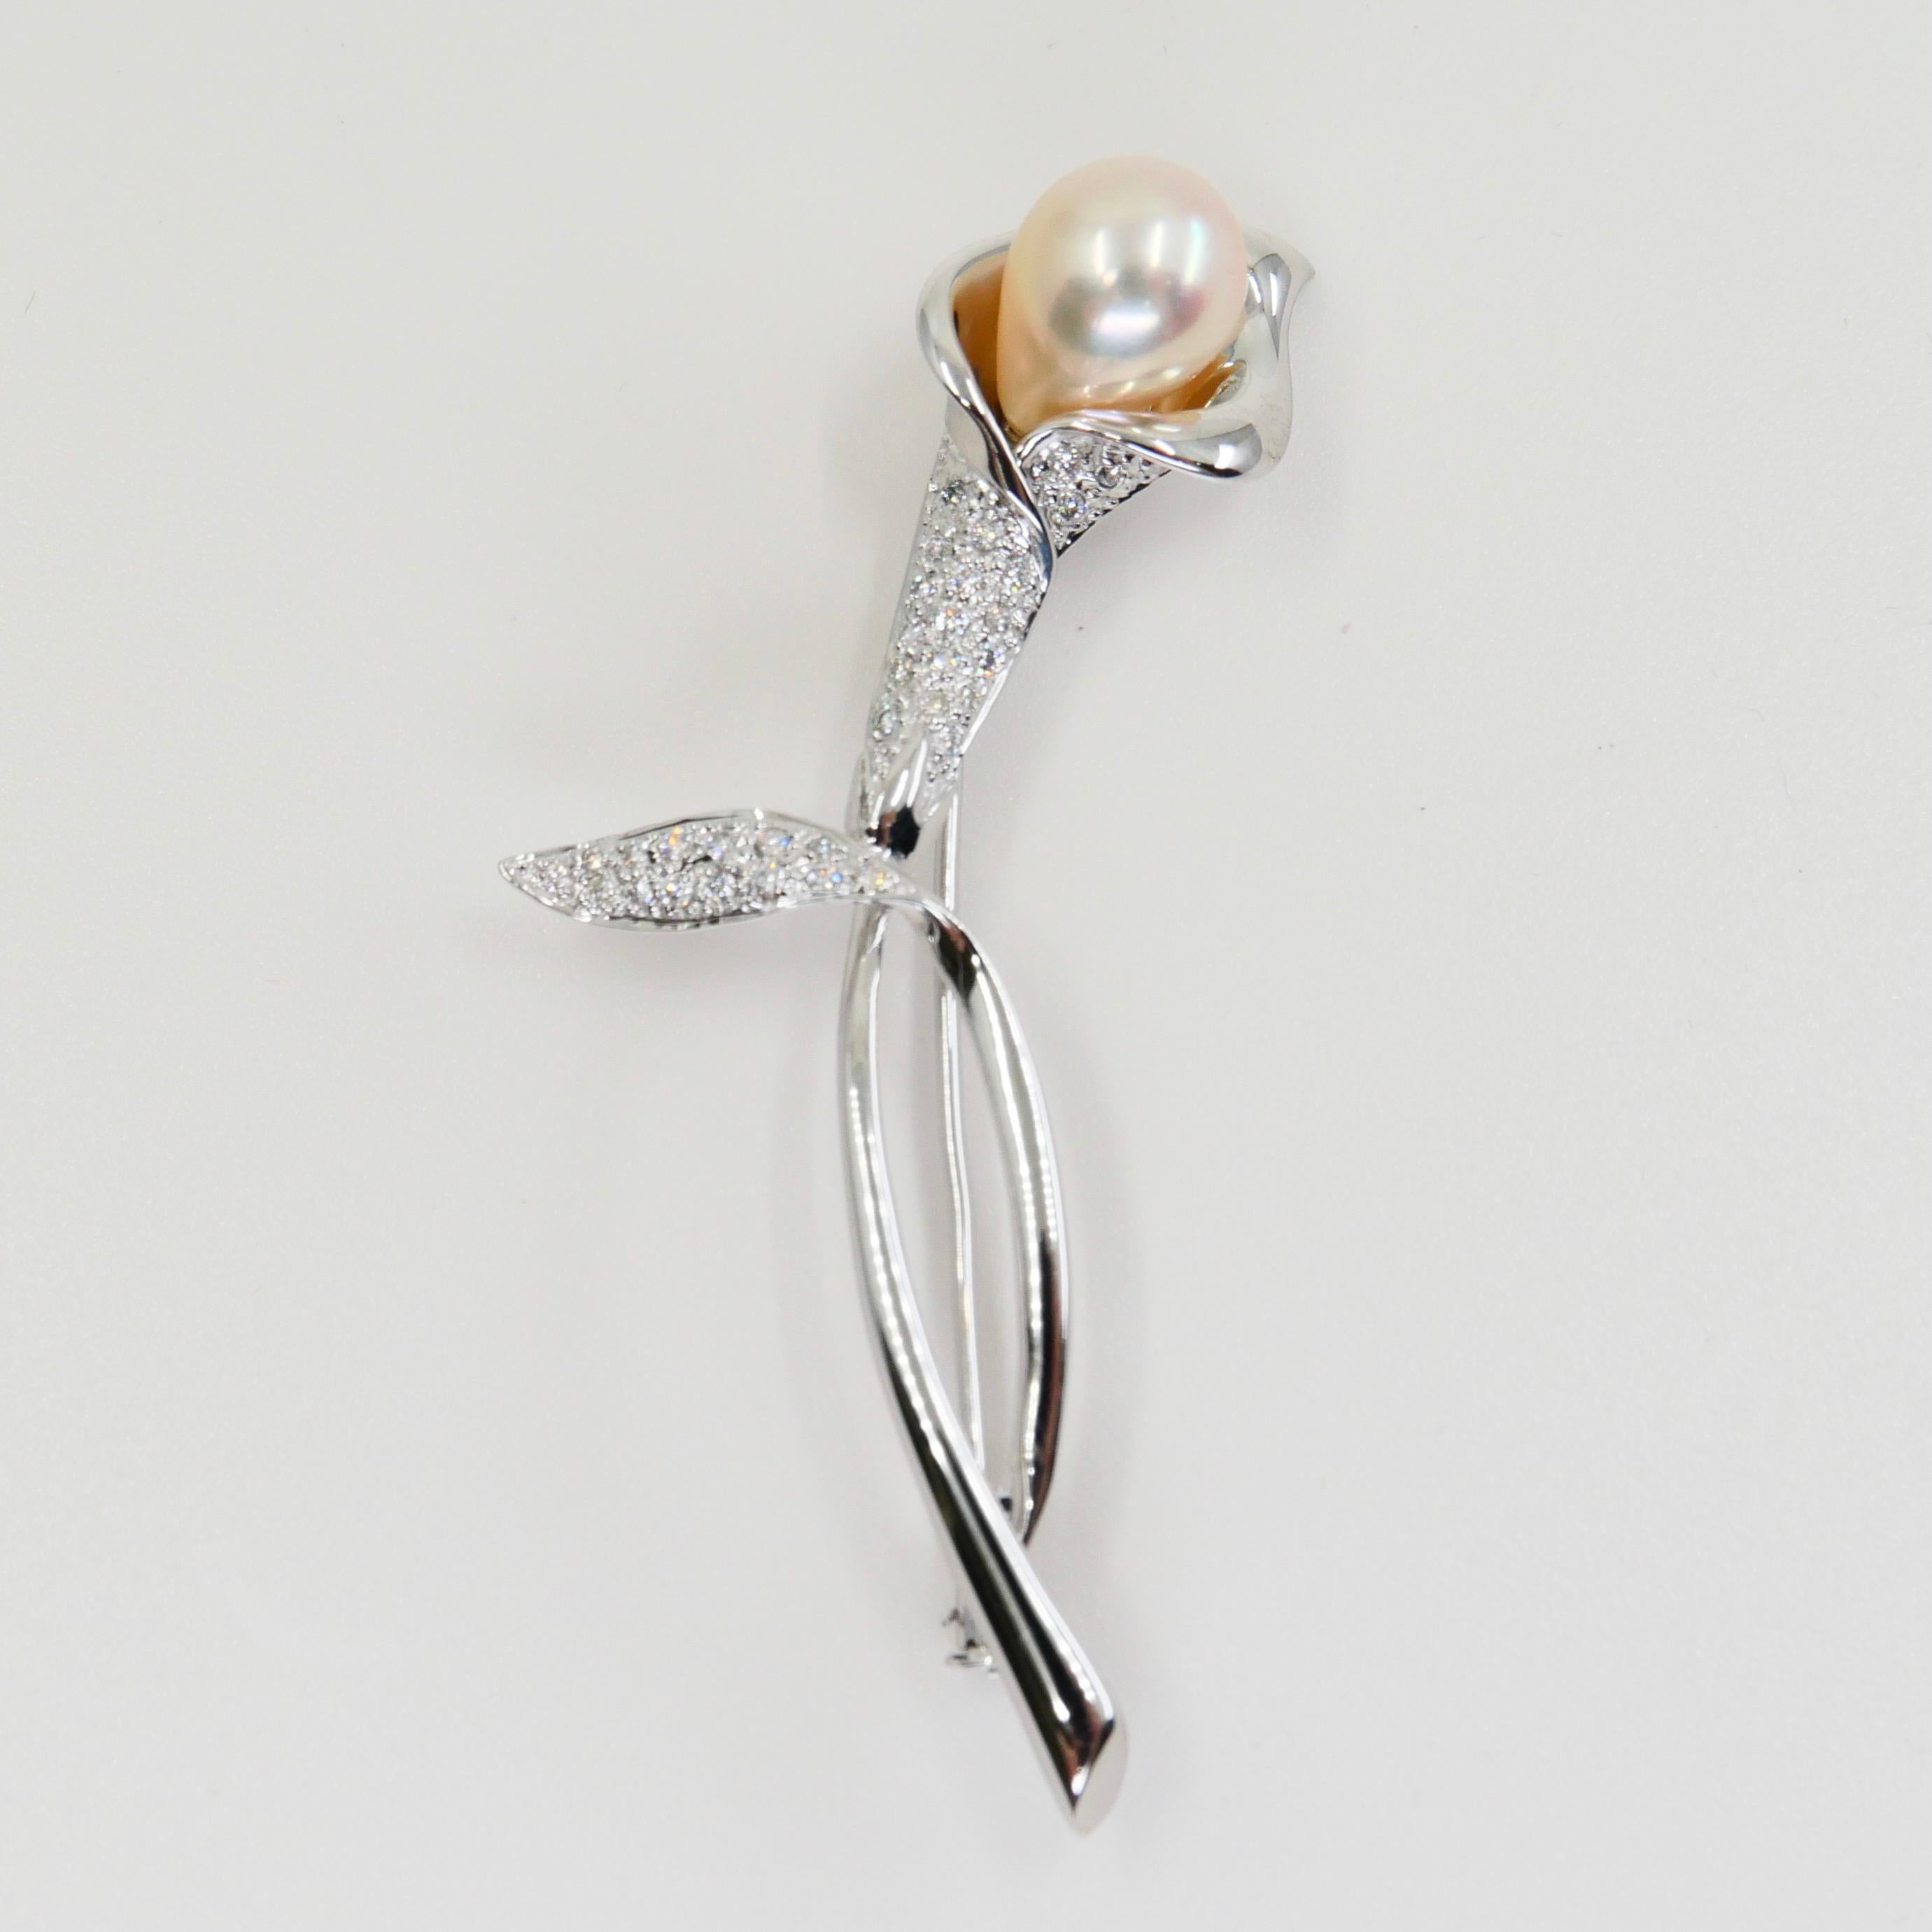 Please check out the HD video. This classic flower brooch has a classic flower design. It looks good dressed up or down. The brooch is about 6cm x 3cm. This brooch is 18k white gold set with one freshwater pearl about 8.8mm in size and 31 white